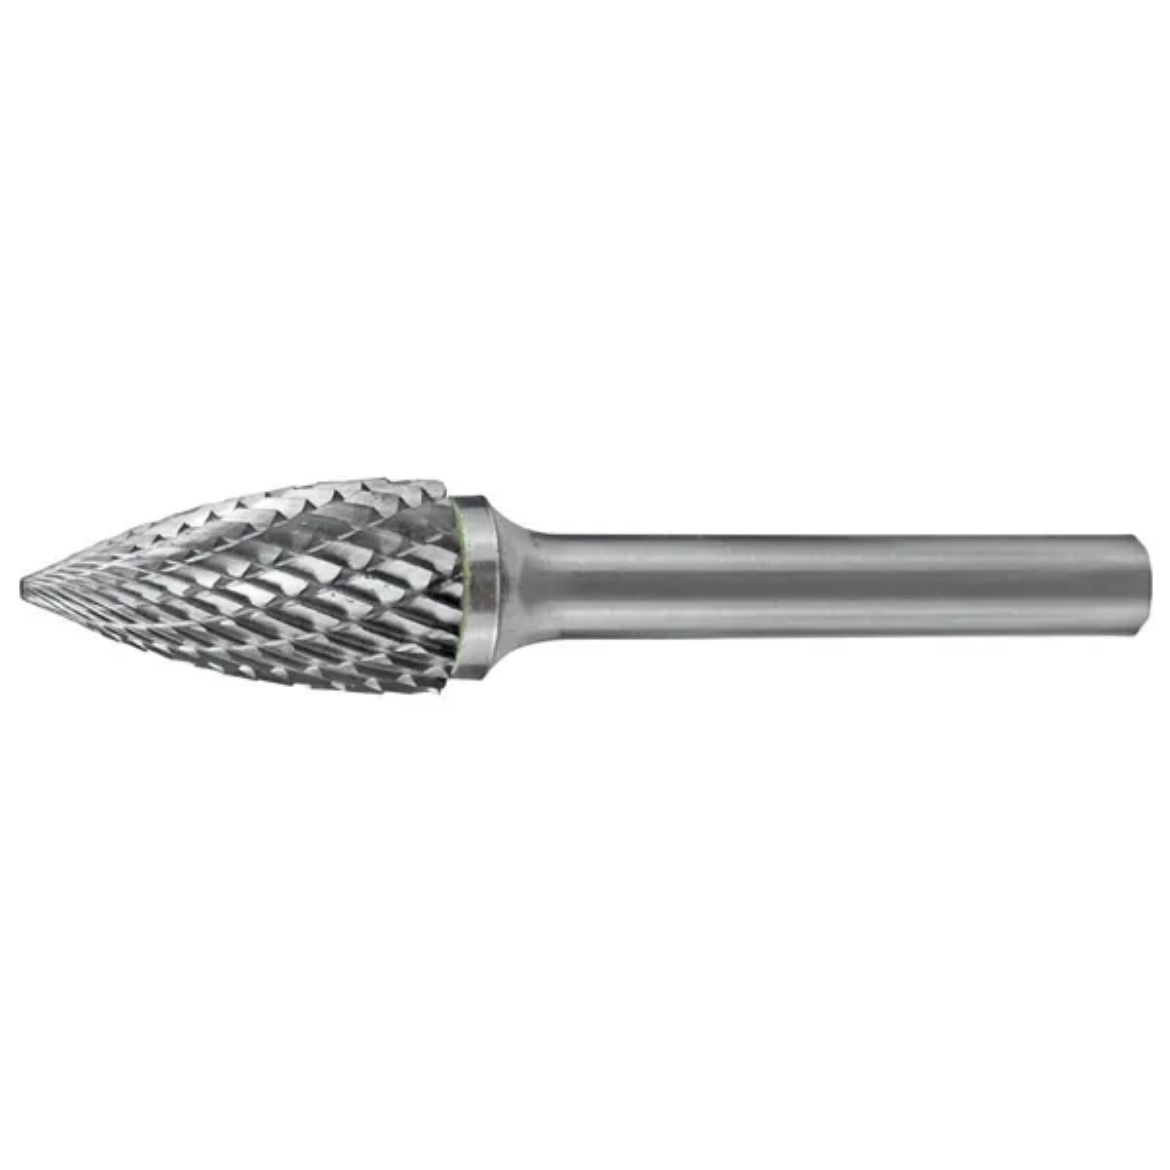 Picture of HOLEMAKER CARBIDE BURR, TREE SHAPE POINTED END 5/16" X 3/4" HEAD, 1/4" SHANK DC